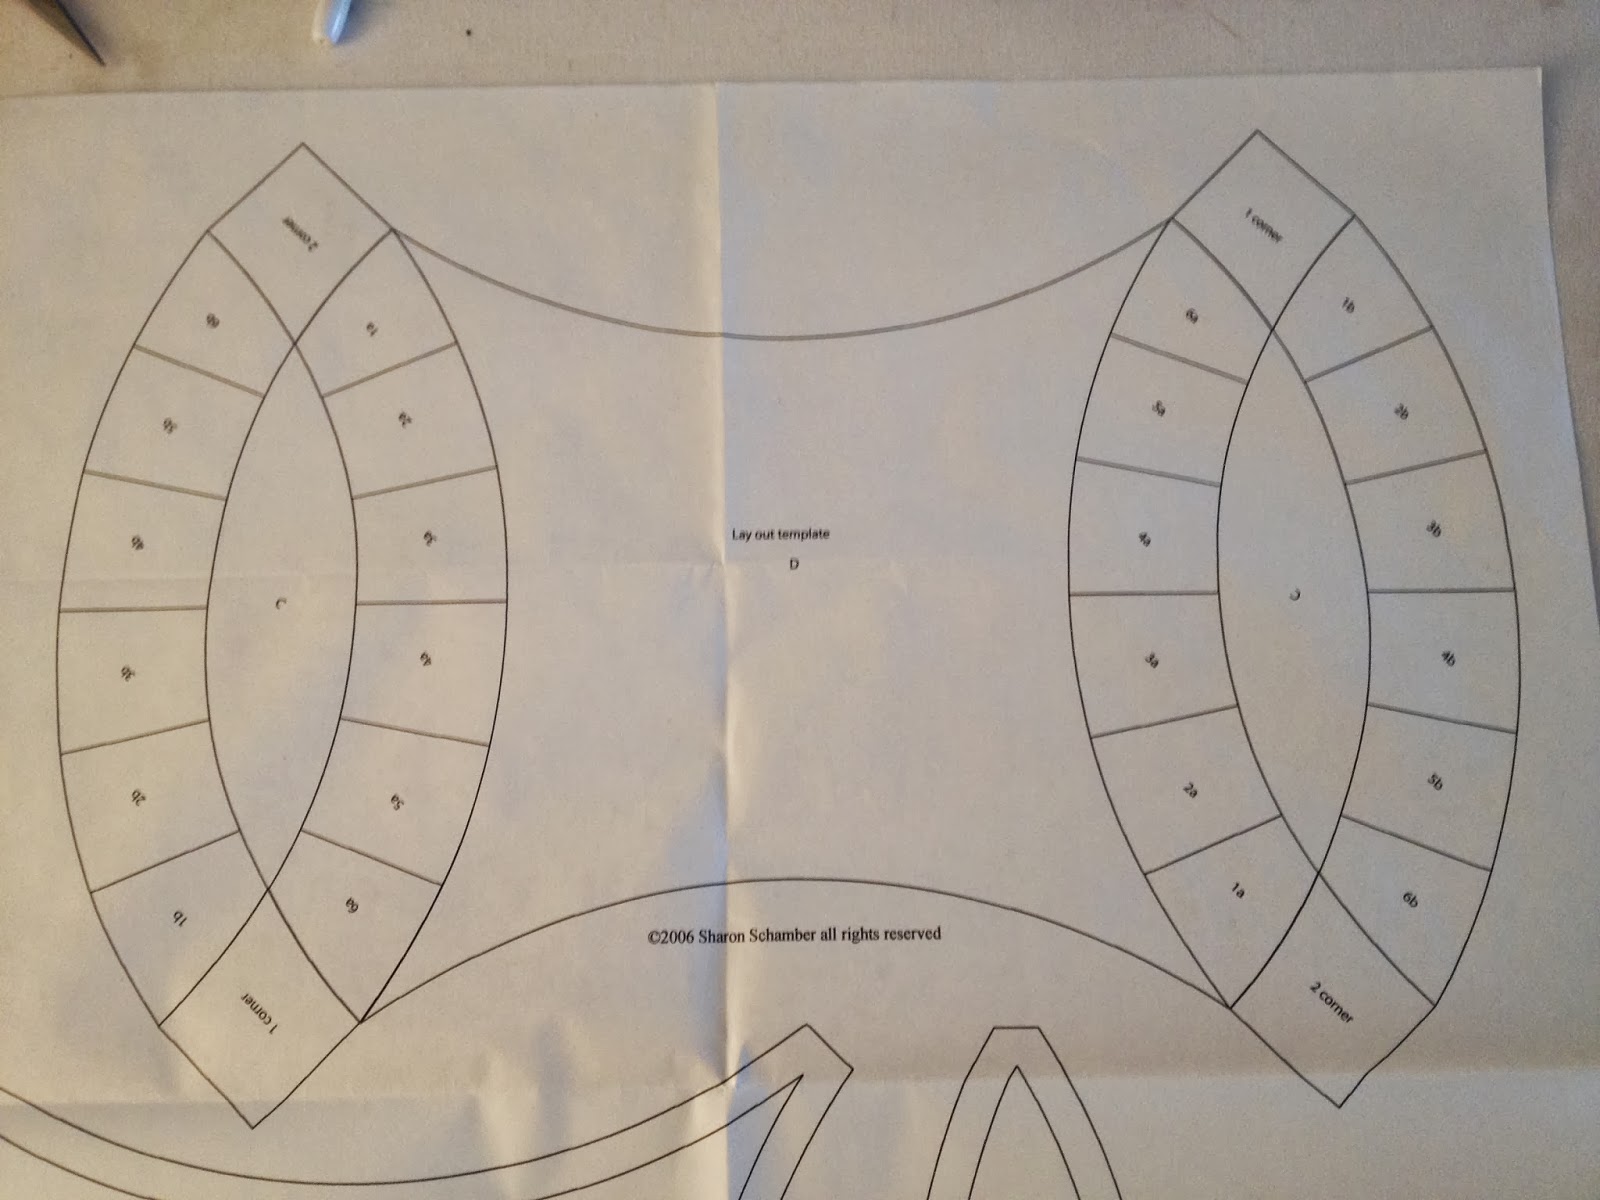 double-wedding-ring-quilt-along-preparing-the-templates-purple